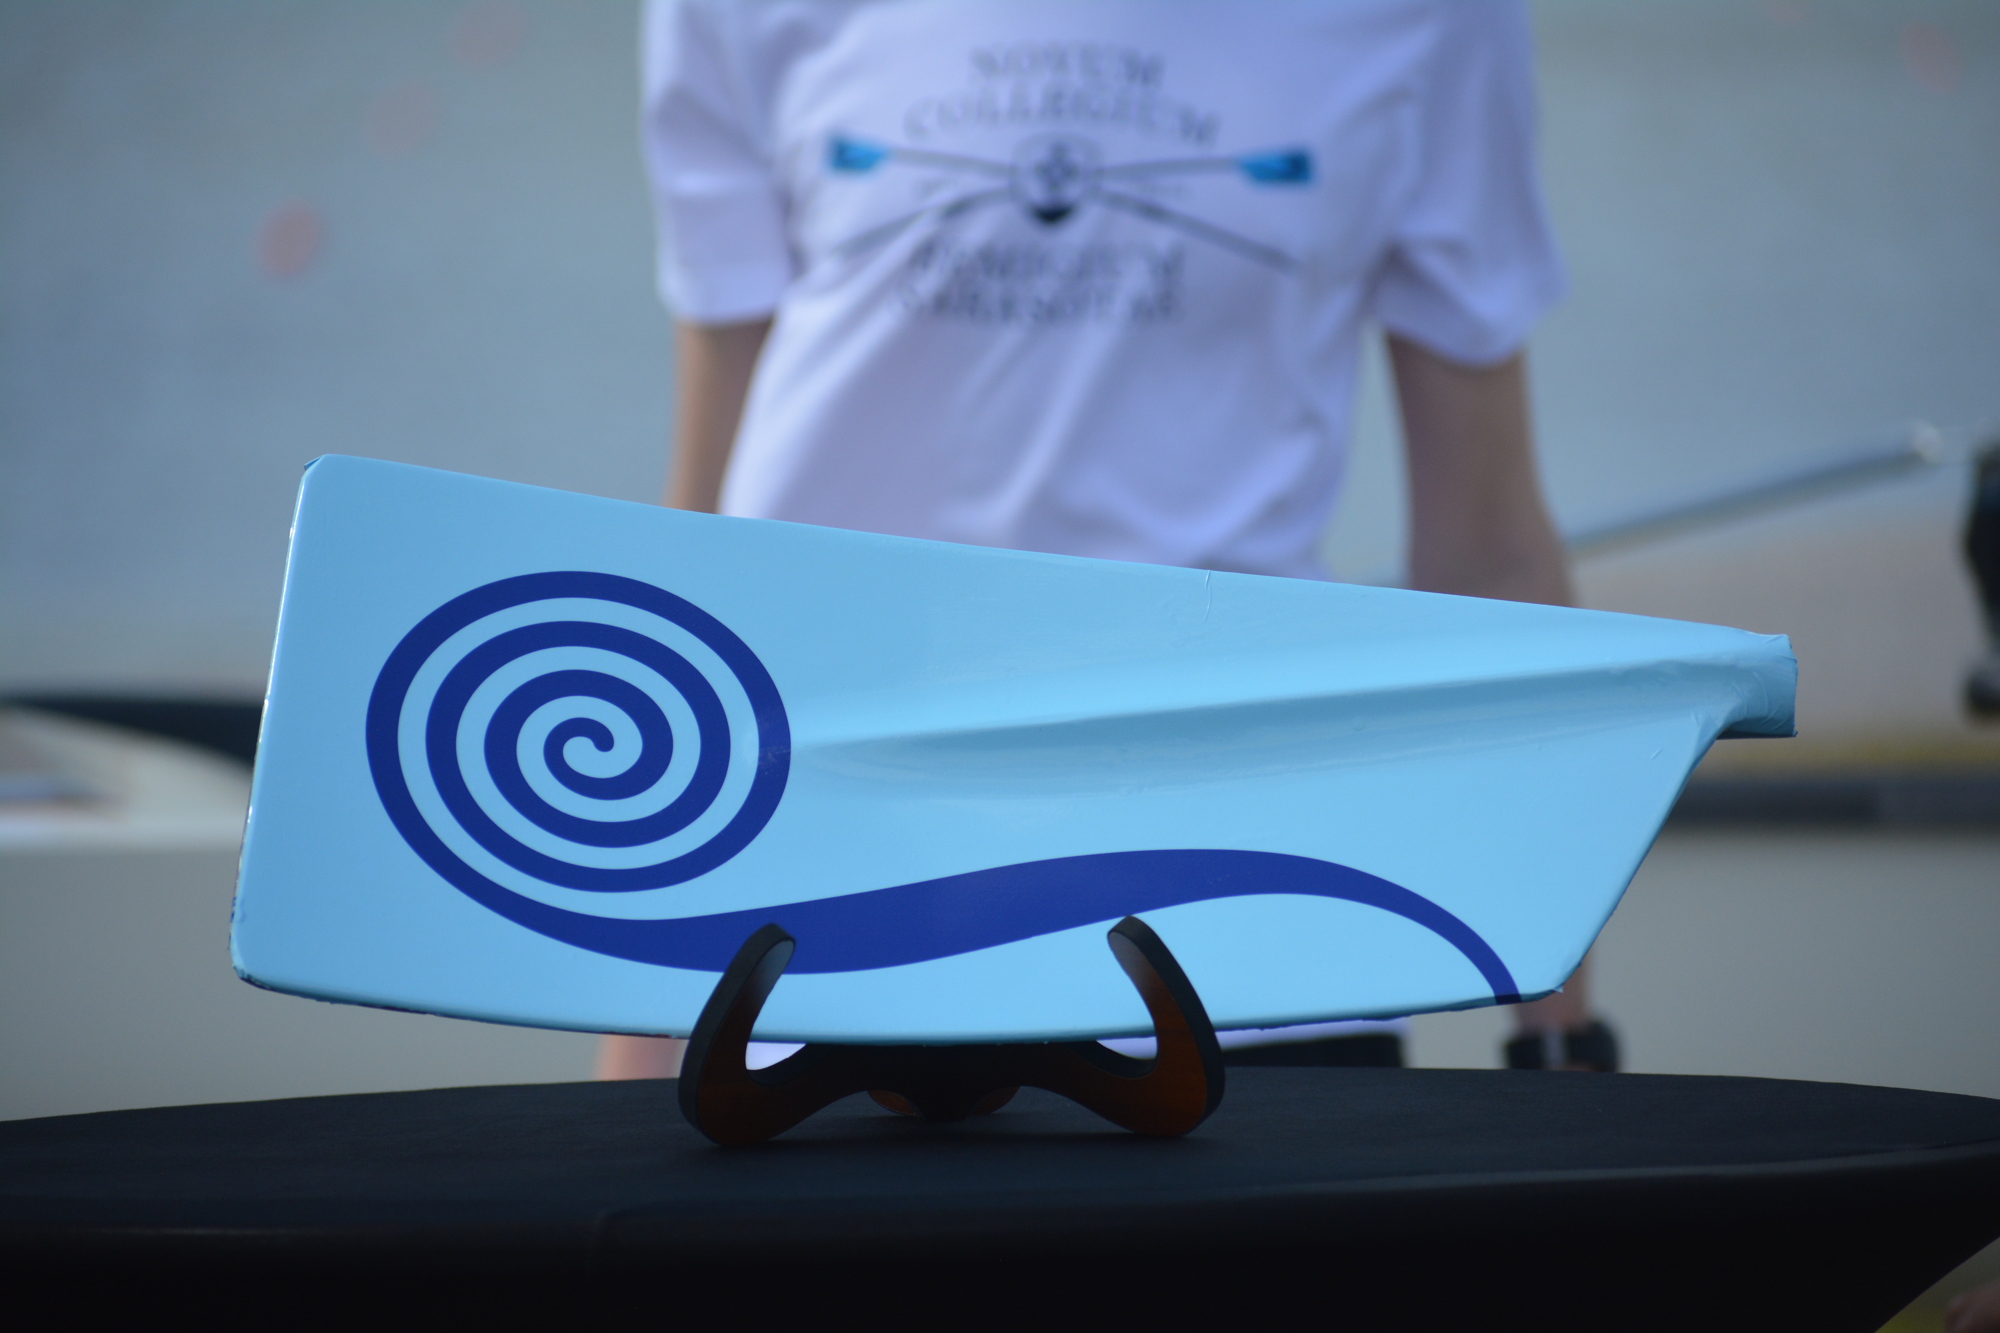 New Crew SRQ's oar design was unveiled at Nathan Benderson Park on Tuesday.